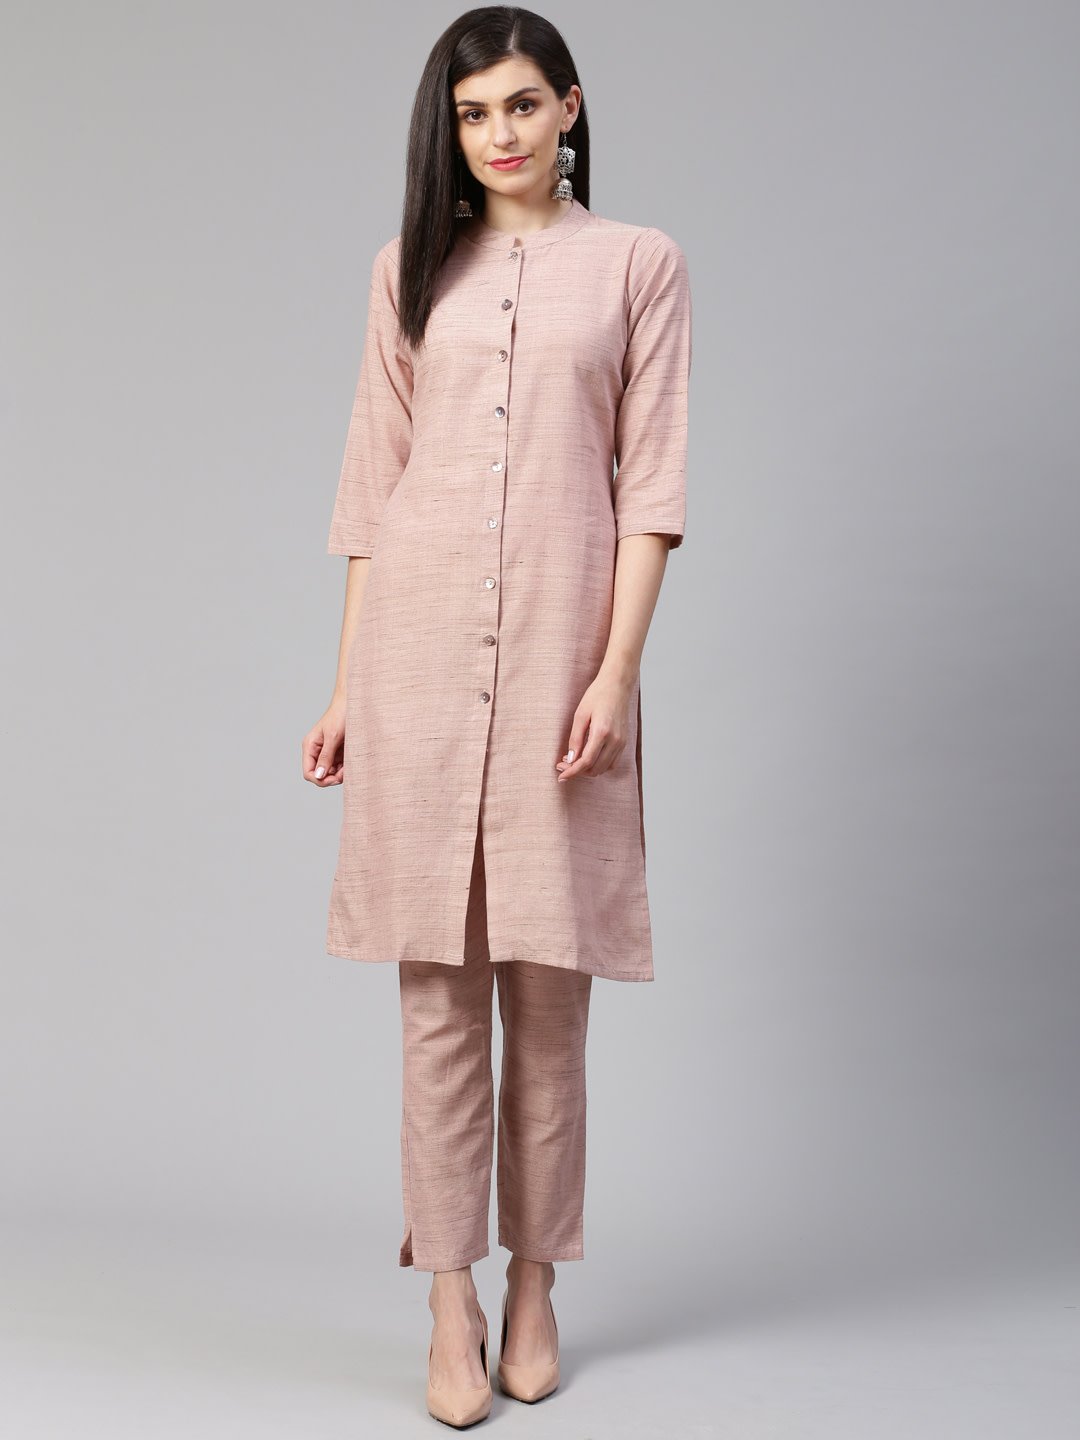 Women's Pink Woven Design Kurta with Trousers - Jompers